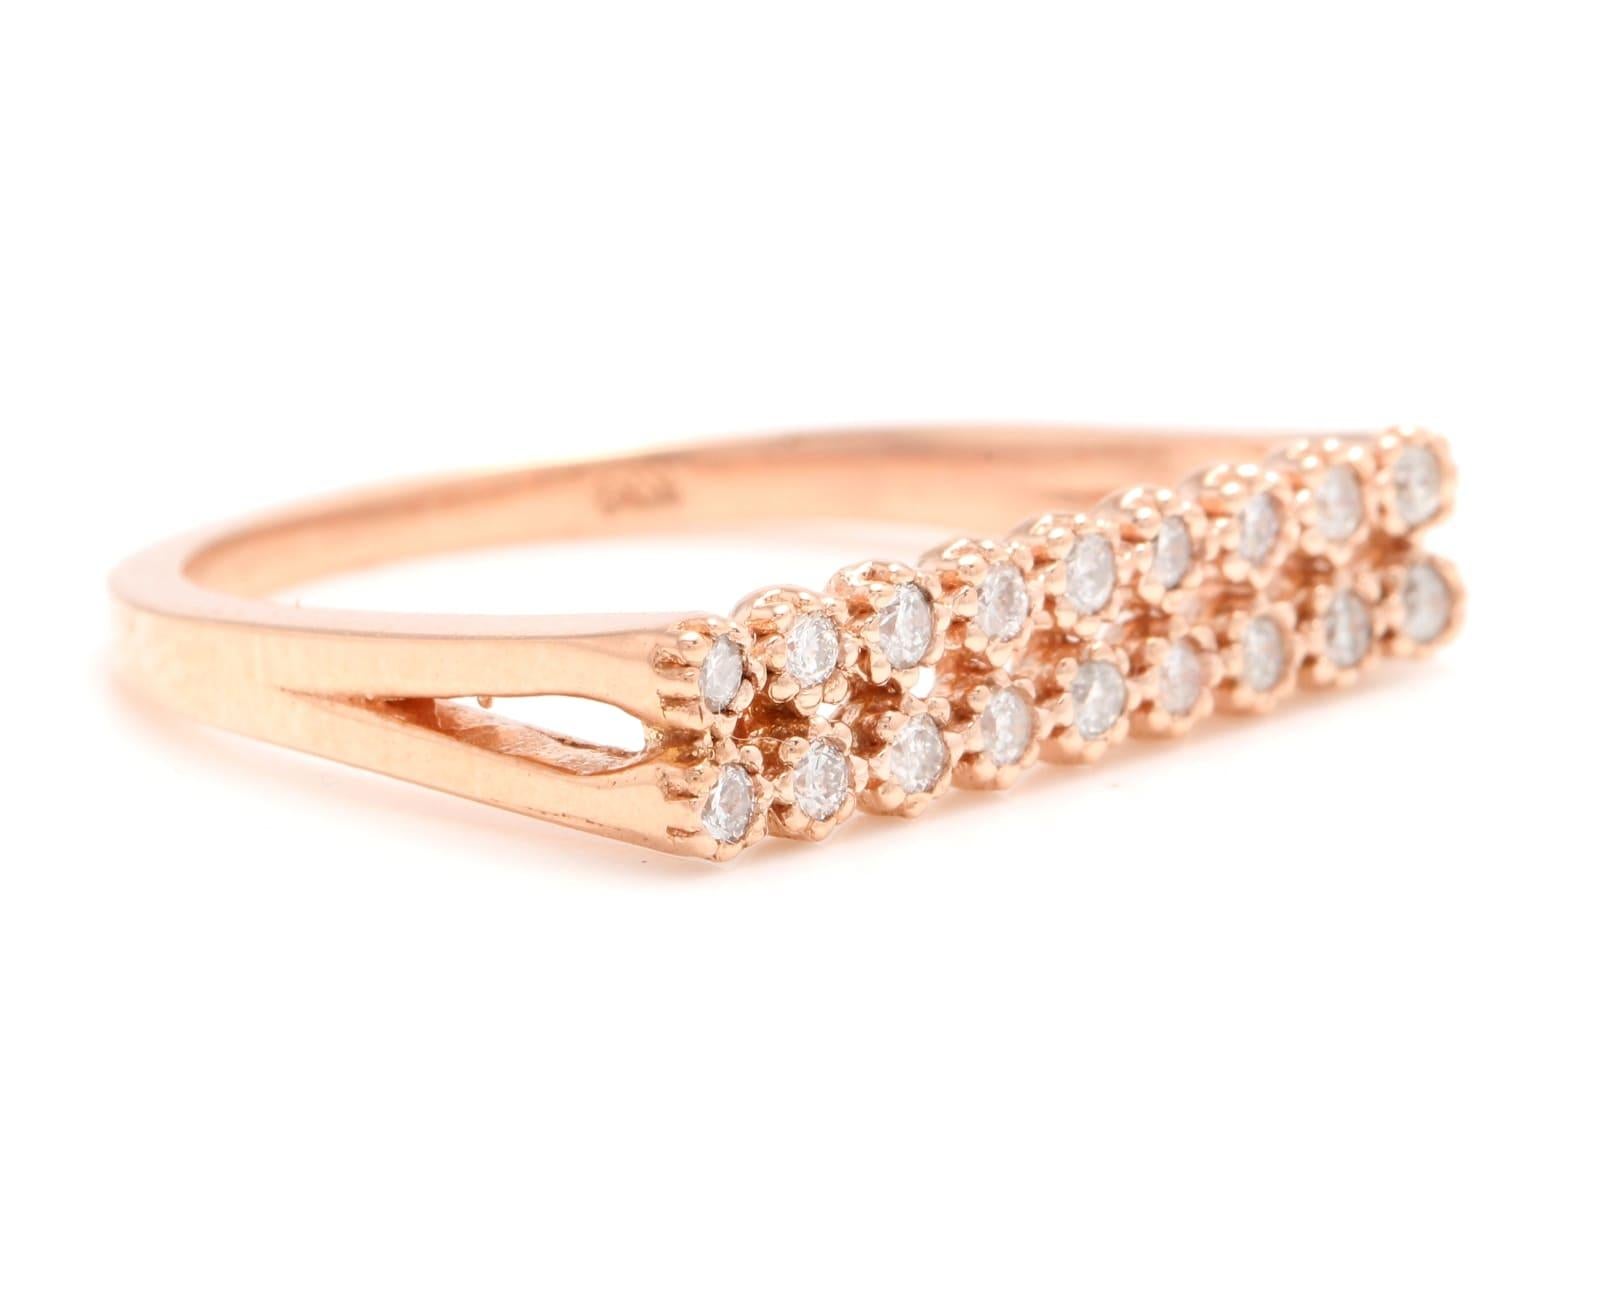 Splendid 0.25 Carats Natural Diamond 14K Solid Rose Gold Ring

Stamped: 14K

Total Natural Round Cut Diamonds Weight: Approx. 0.25 Carats (color G-H / Clarity SI1-SI2)

The width of the ring is: 4.60mm

Length is: 20.00mm

Ring size: 7 (we offer